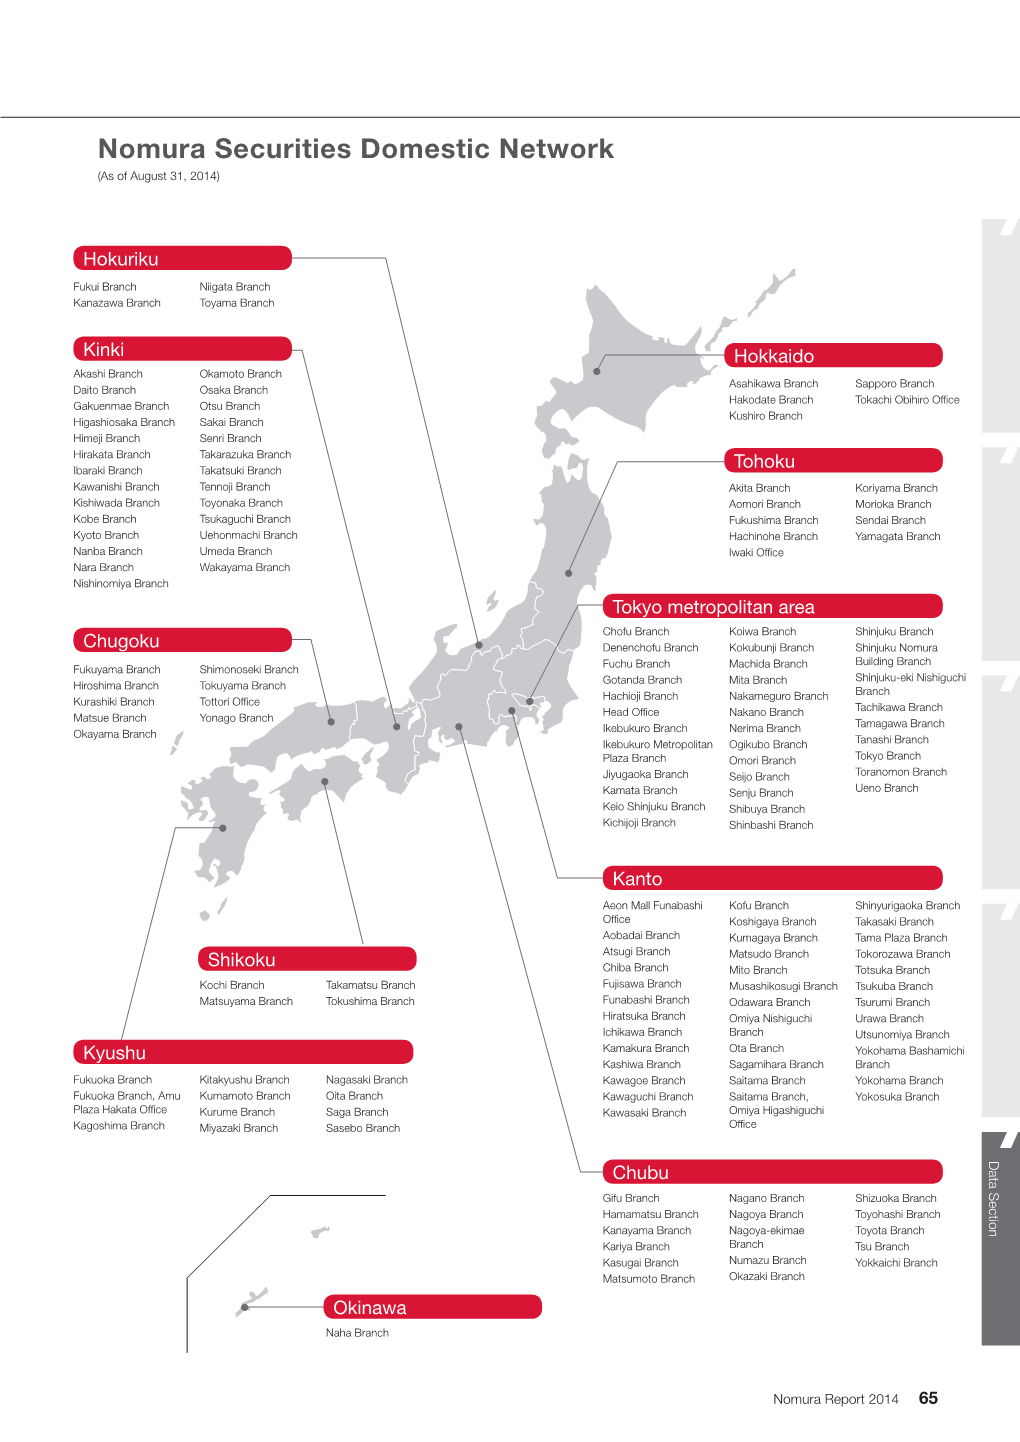 Nomura Securities Domestic Network (As of August 31, 2014)